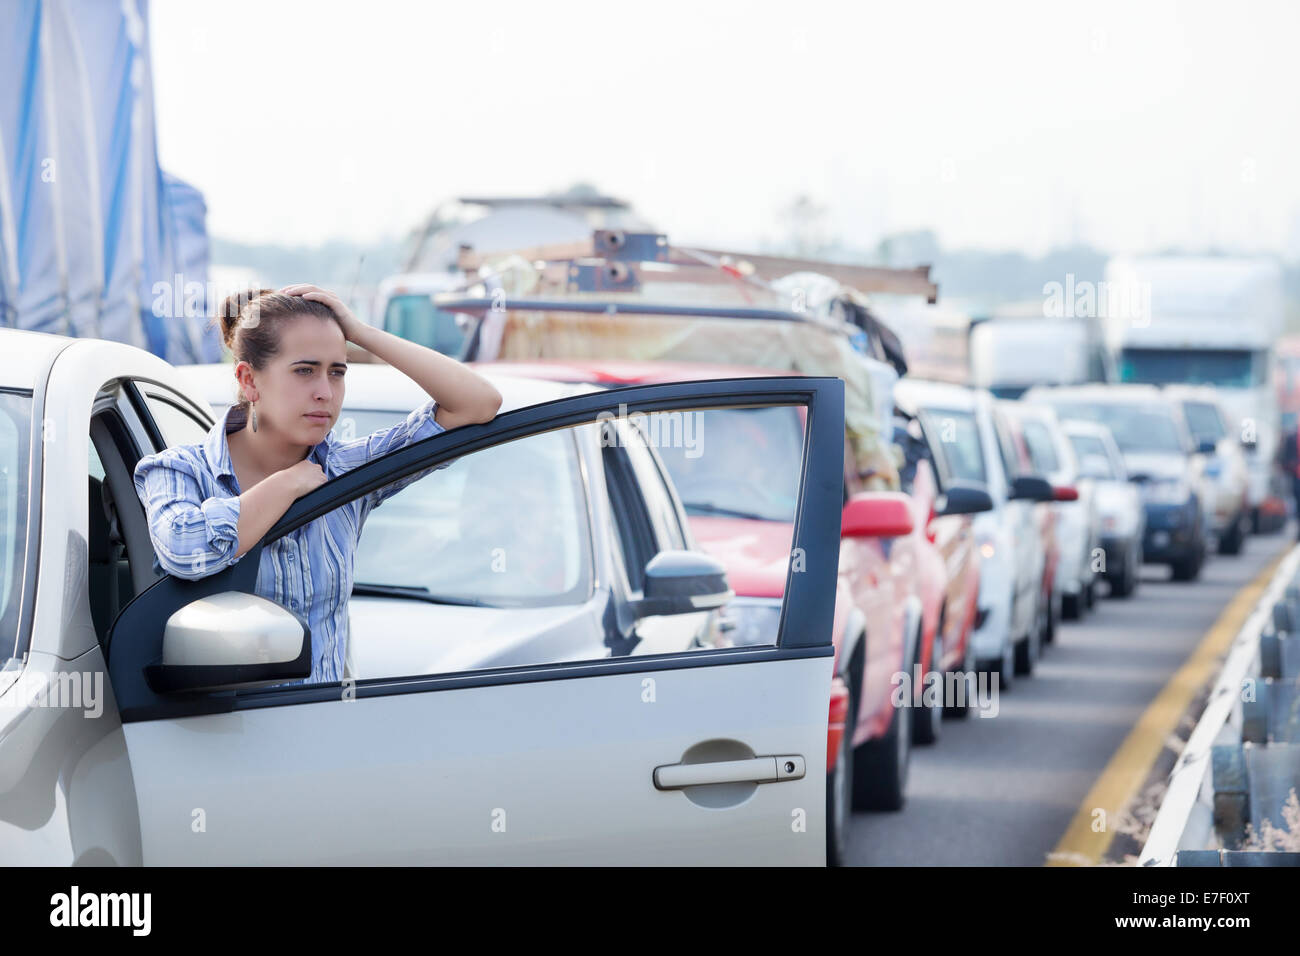 Frustrated young Hispanic woman stuck in a traffic jam. Stock Photo